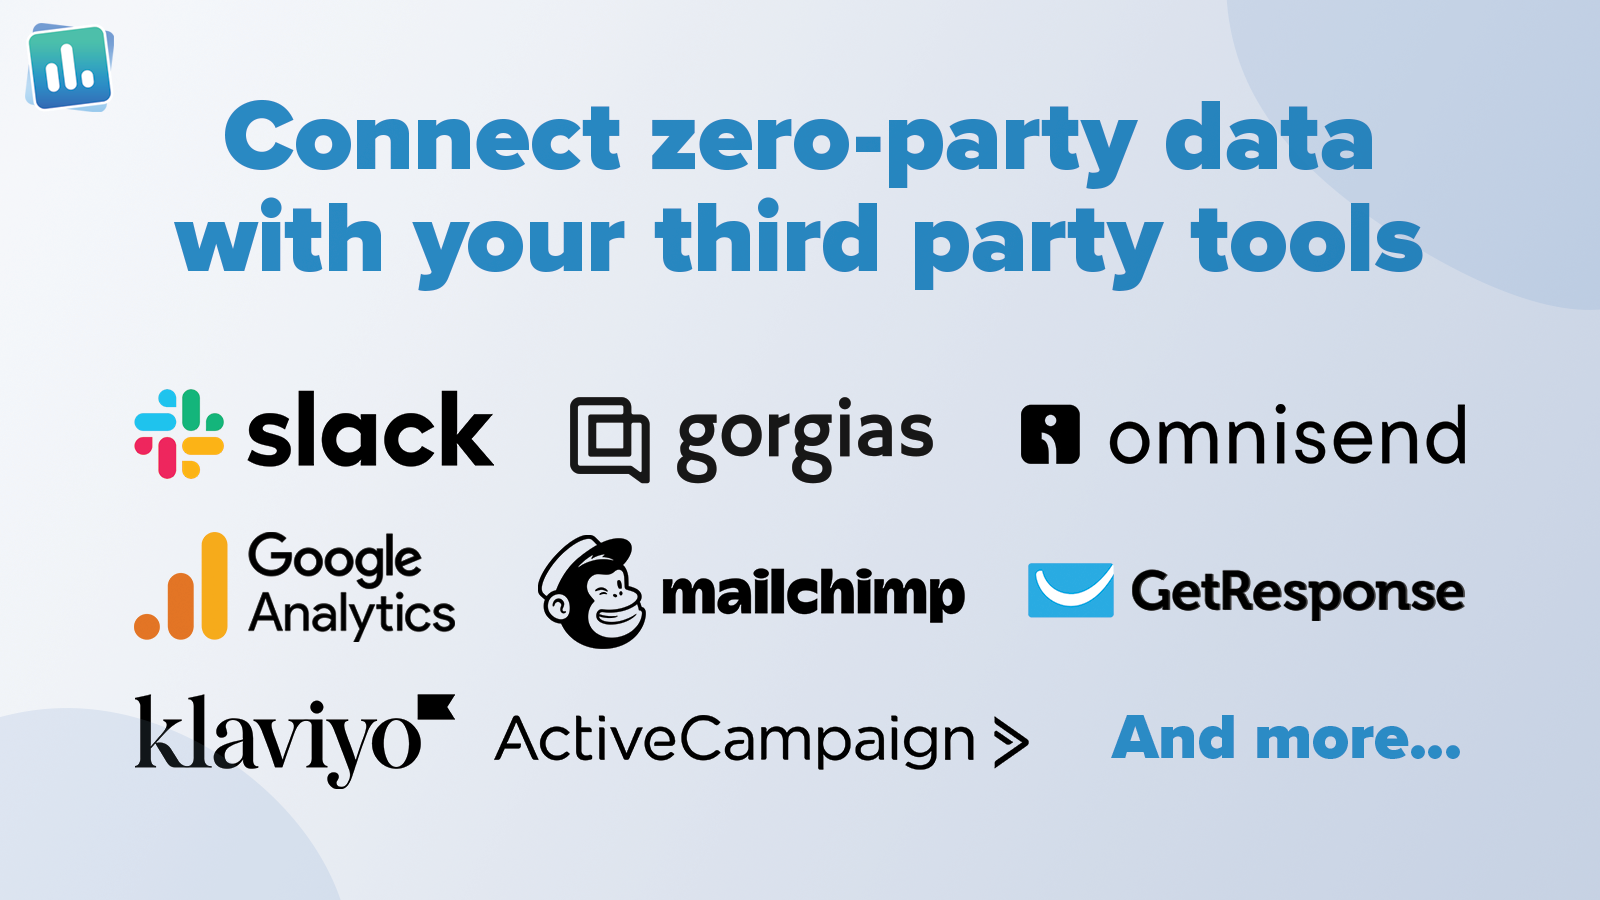 Use our integrations to send data directly to 3rd parties